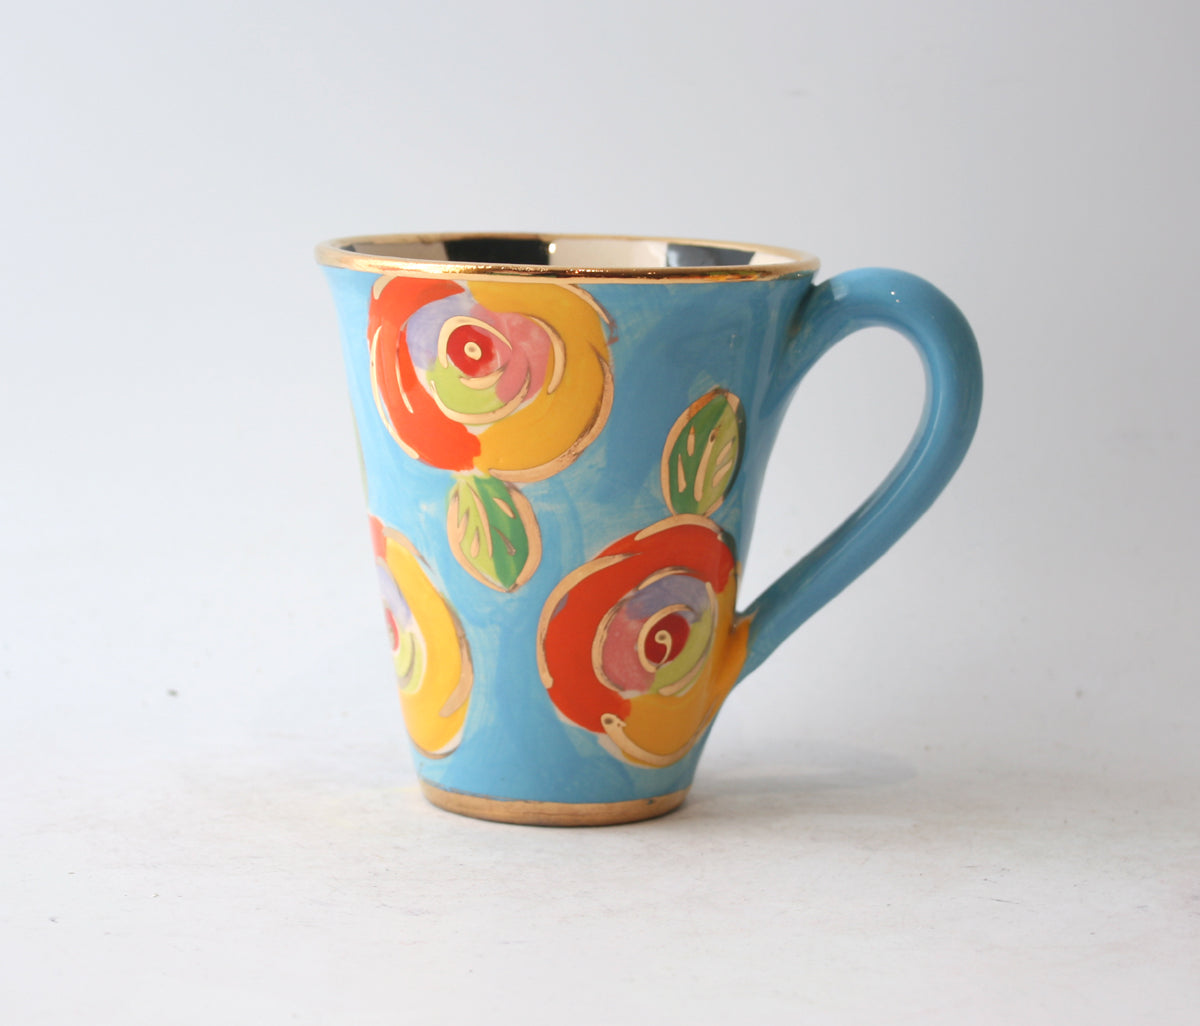 New Shape Large Mug in New Rose Pastel Blue with Black and White Stripes